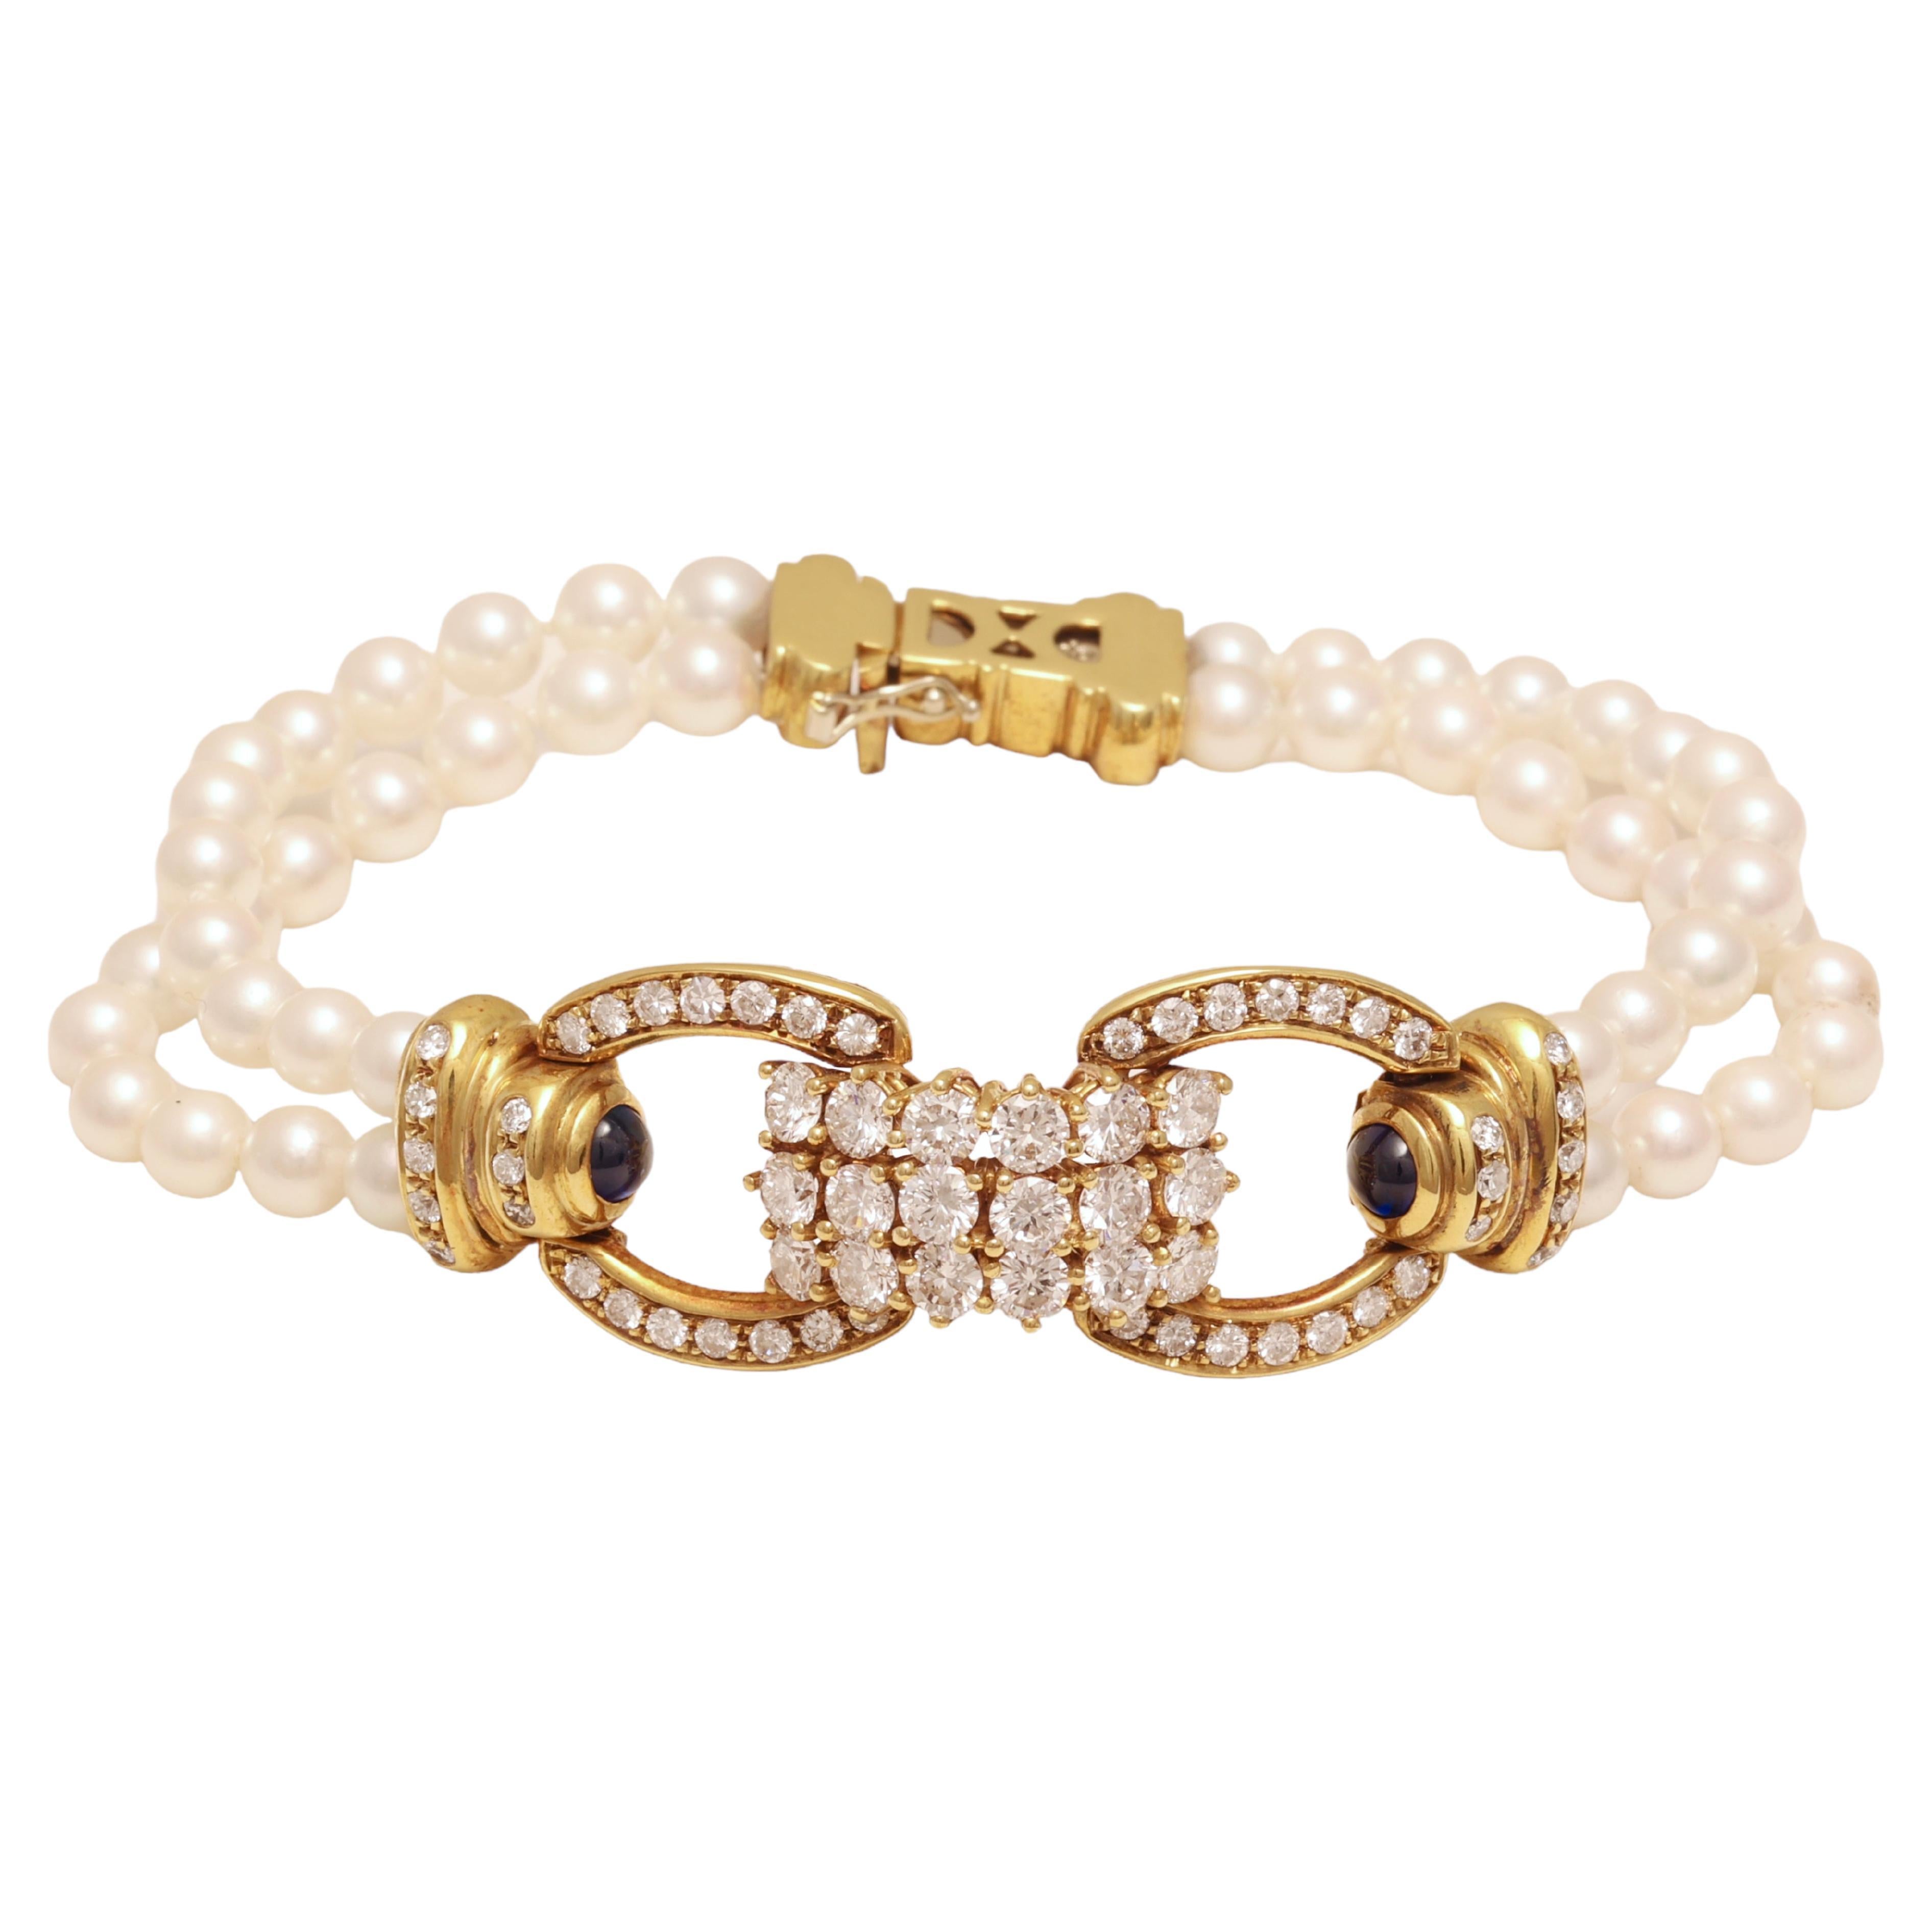 Pearl Bracelet in 18kt Yellow Gold Set With 3.58ct. Diamonds, Pearls & Sapphires For Sale